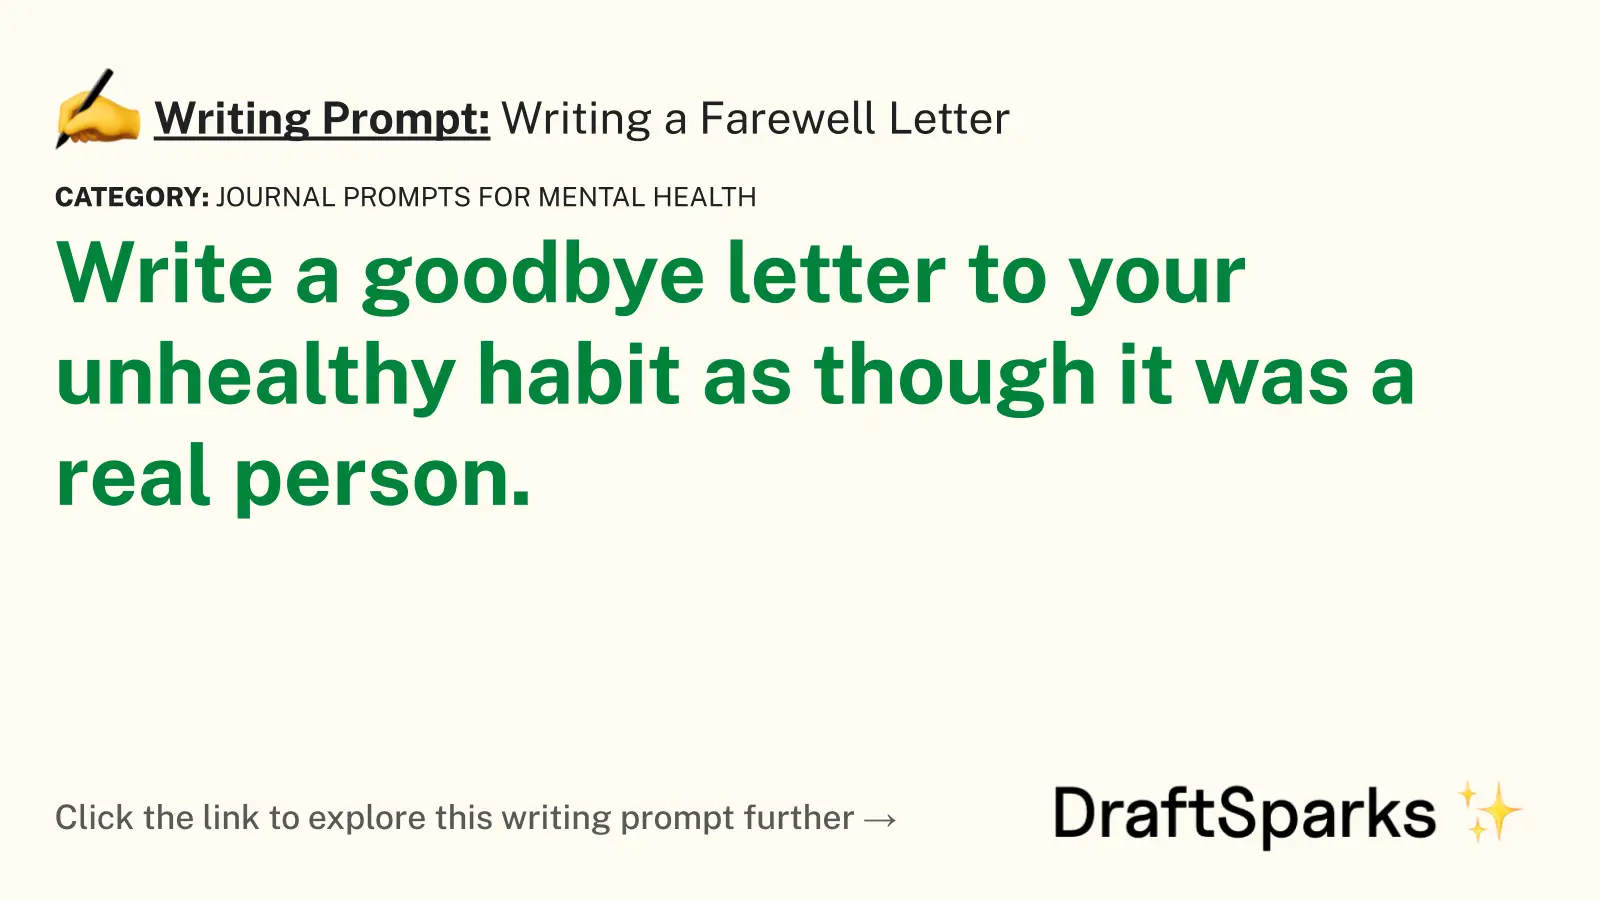 Writing a Farewell Letter